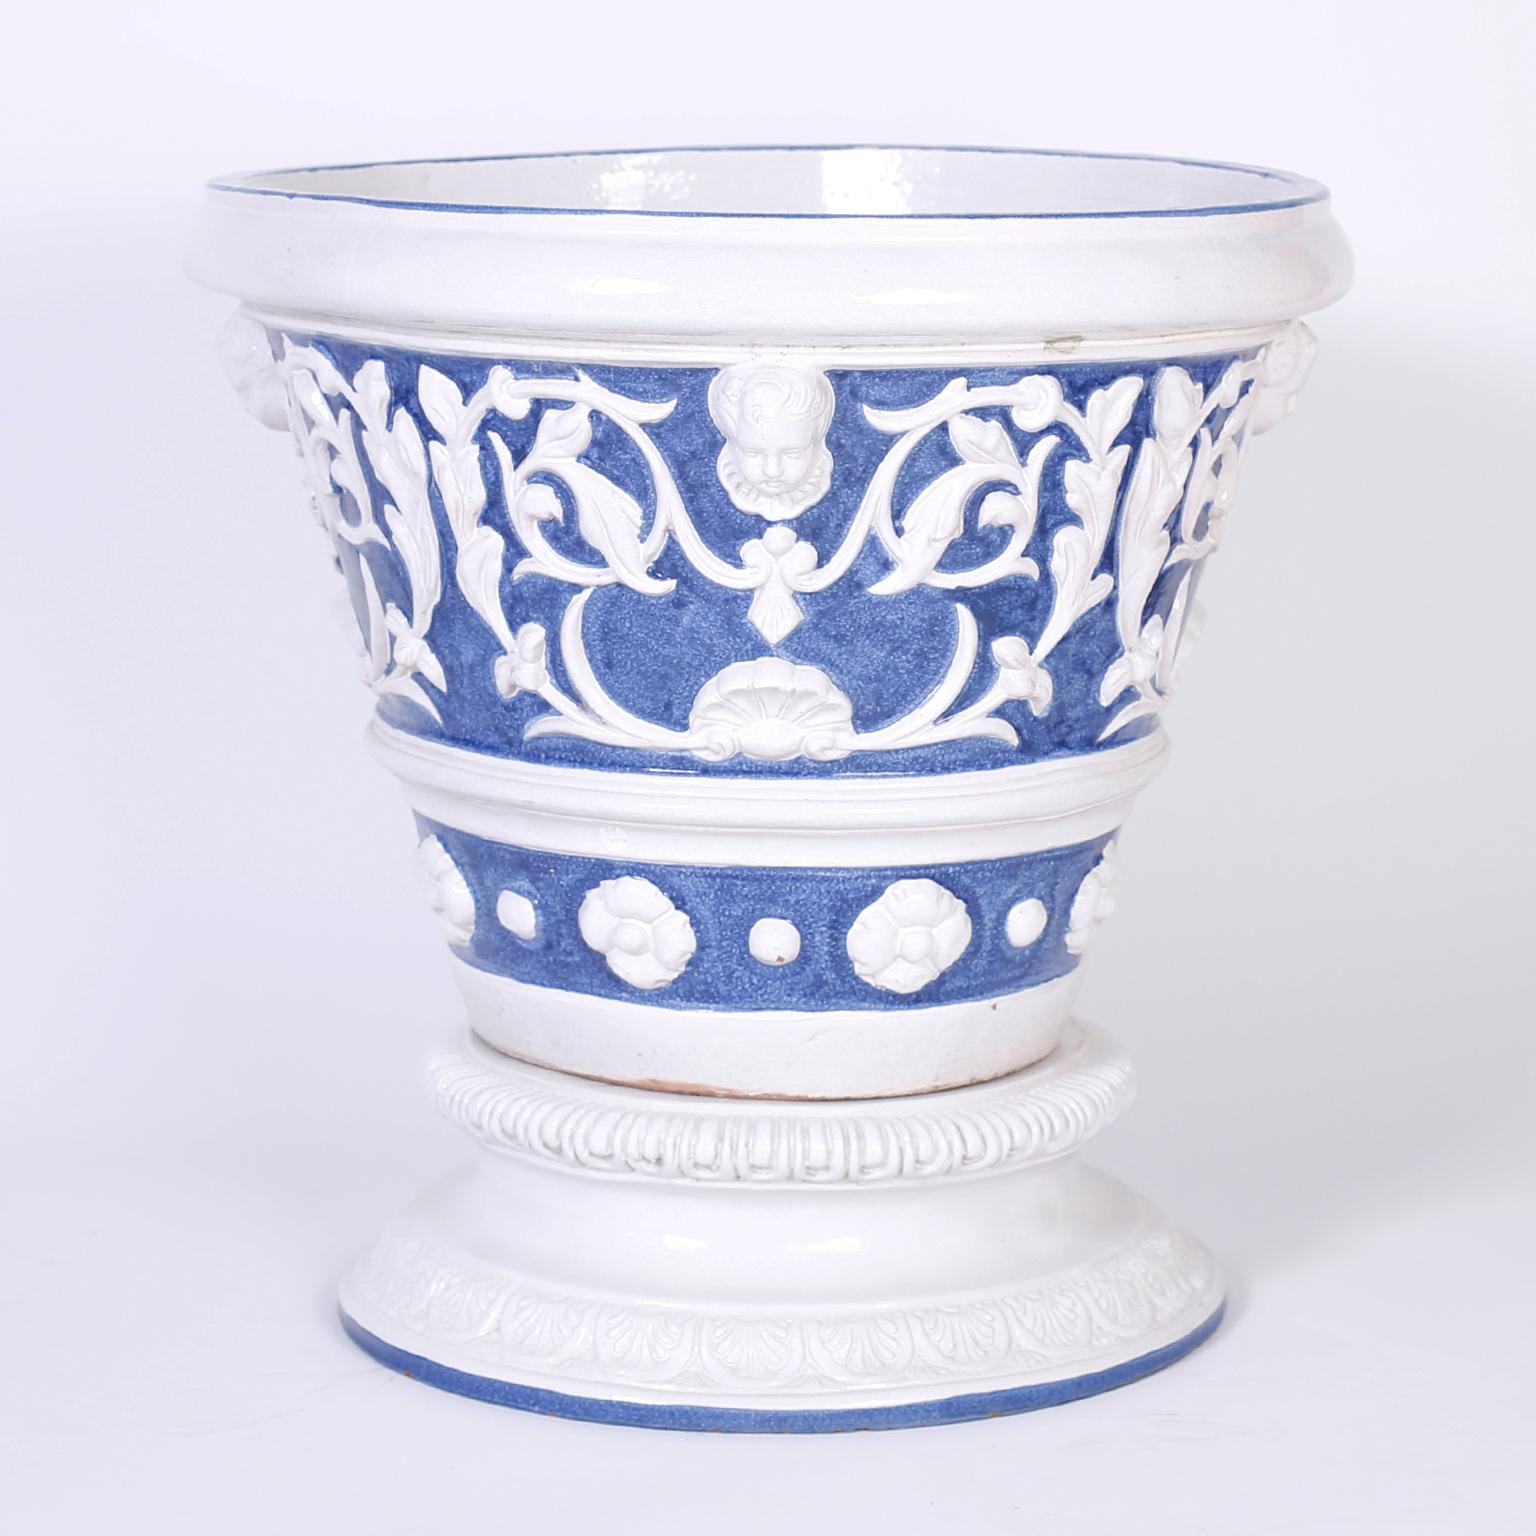 Pair of terra cotta planters with old world style and charm, decorated with classical floral motifs in blue and white under glaze.